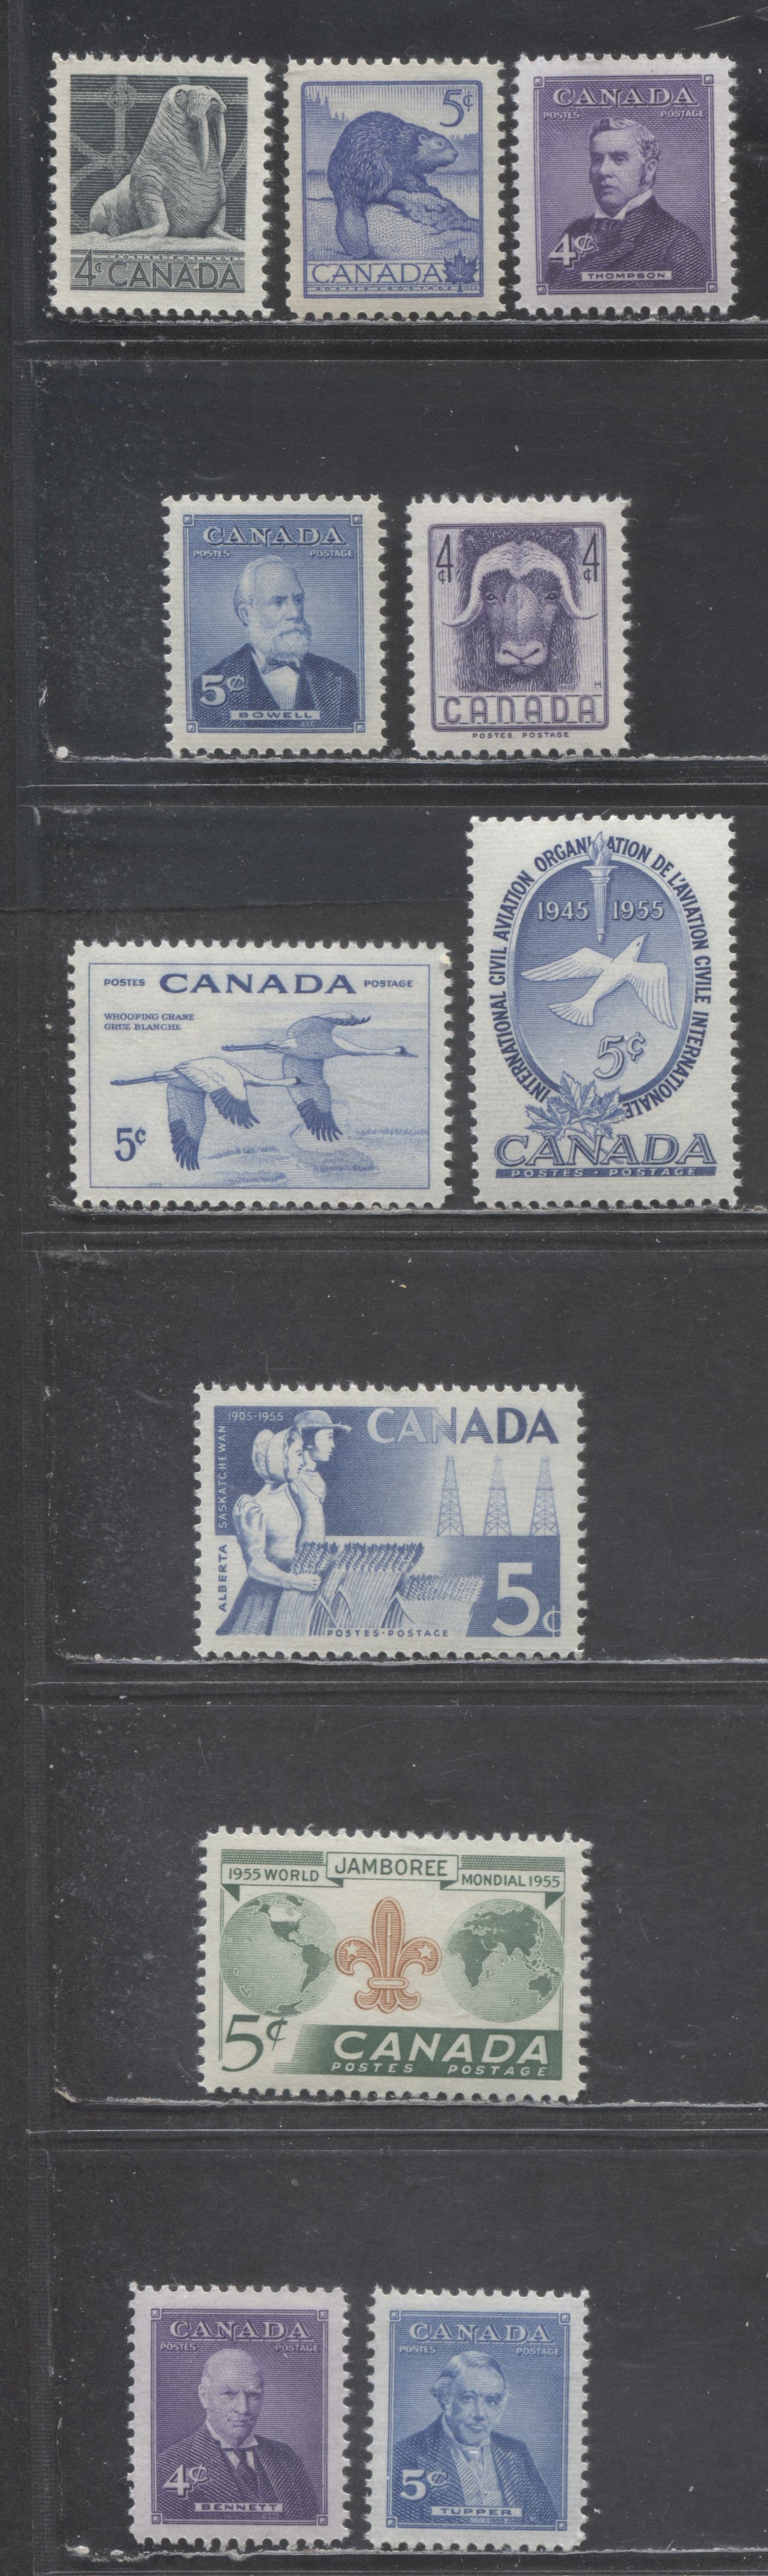 Canada #335-336, 349-350, 352-358 4c-5c Various Colours Various Subjects, 1954-1955 Wildlife Week Issue - Prime Ministers Issue, 11 VFNH Singles, Horizontally & Vertically Ribbed Papers,  Cream & Yellowish Cream Gums